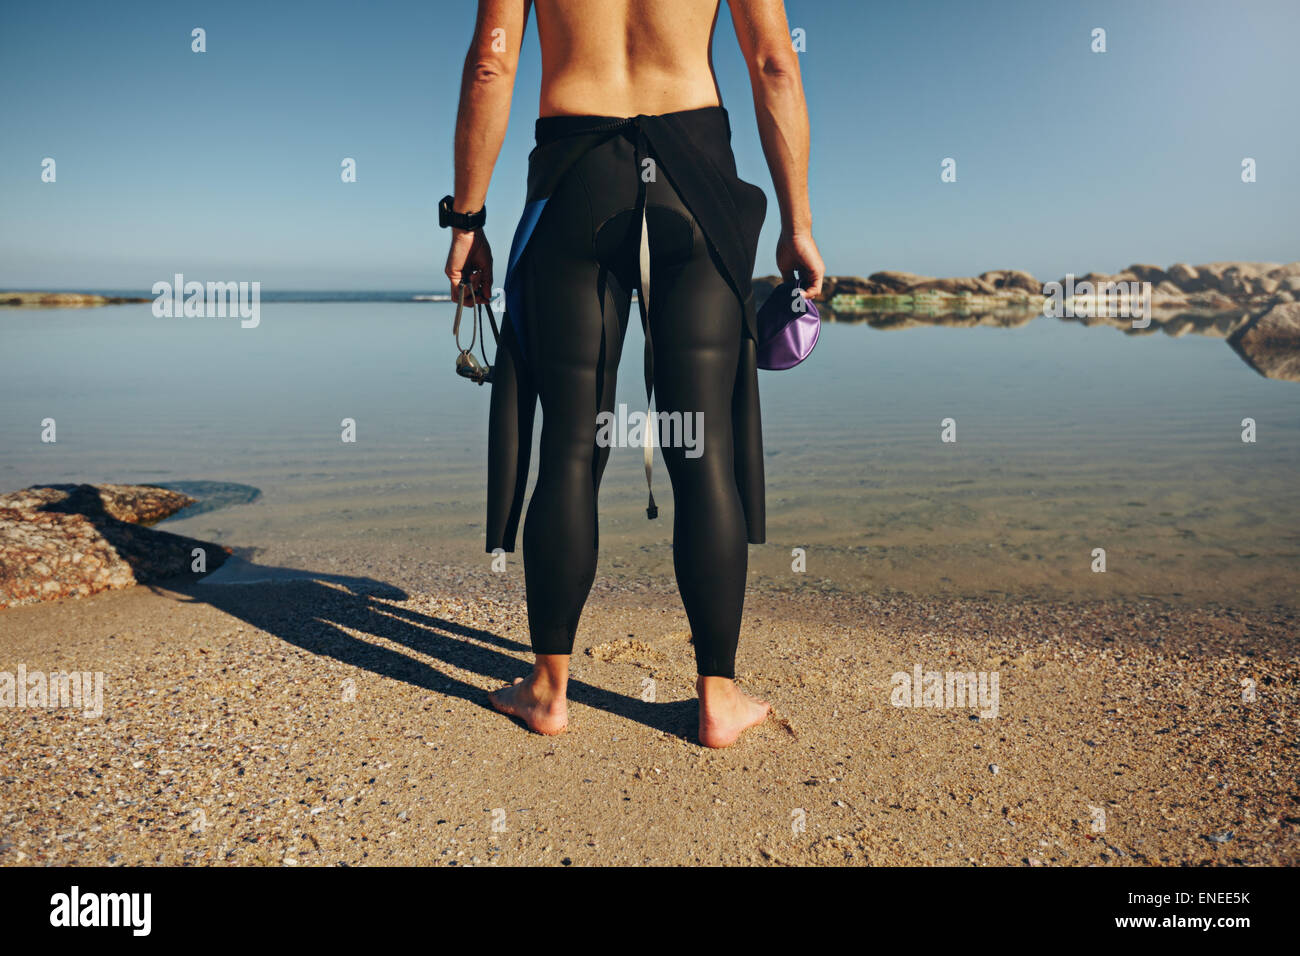 Rear view of young man standing on lake wearing wetsuit. Cropped shot of a triathlete preparing for a race wearing a wetsuit pri Stock Photo